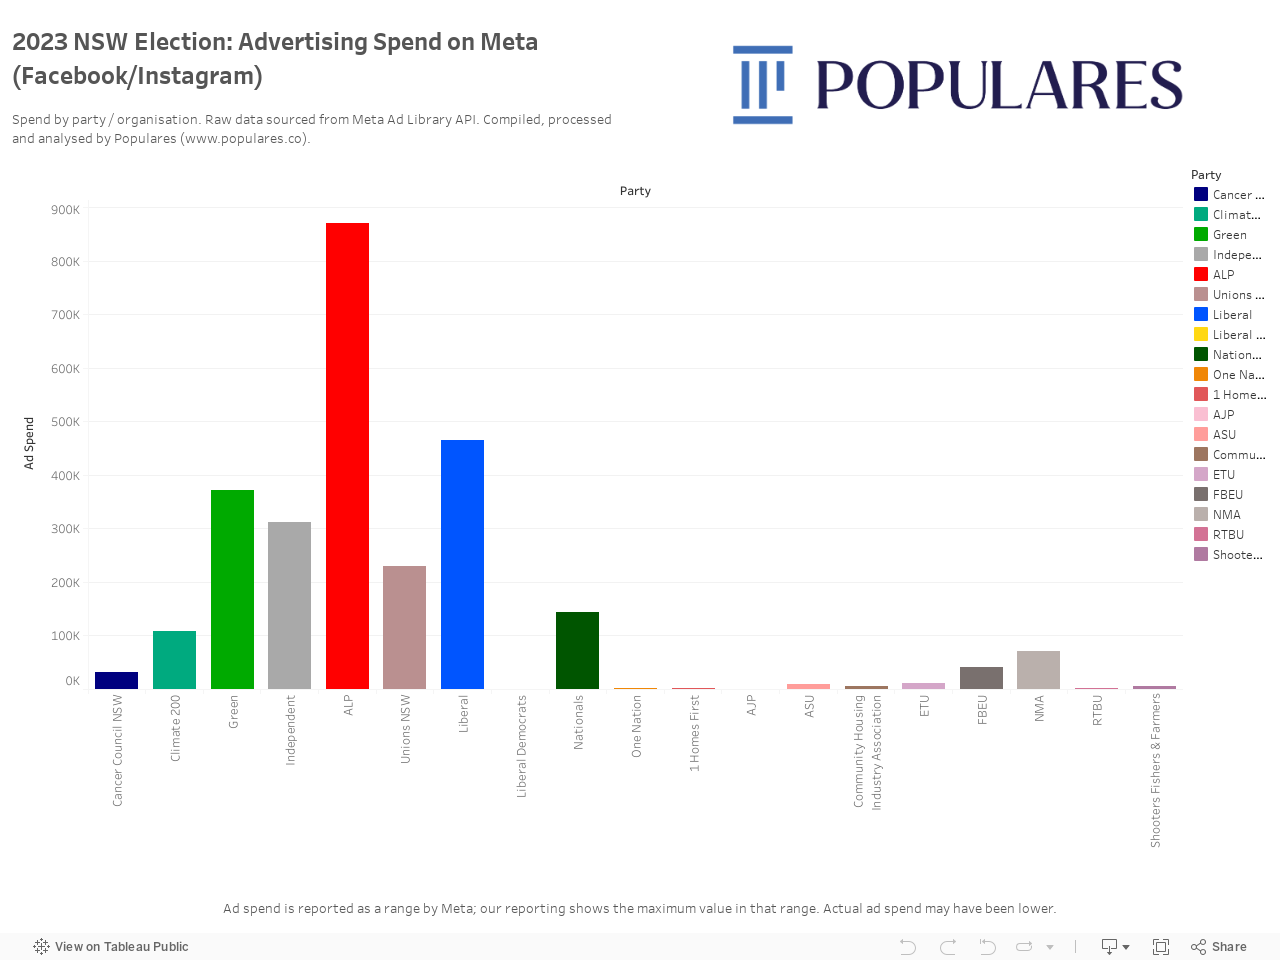 2023 NSW Election - Ad spend by party / organisation 